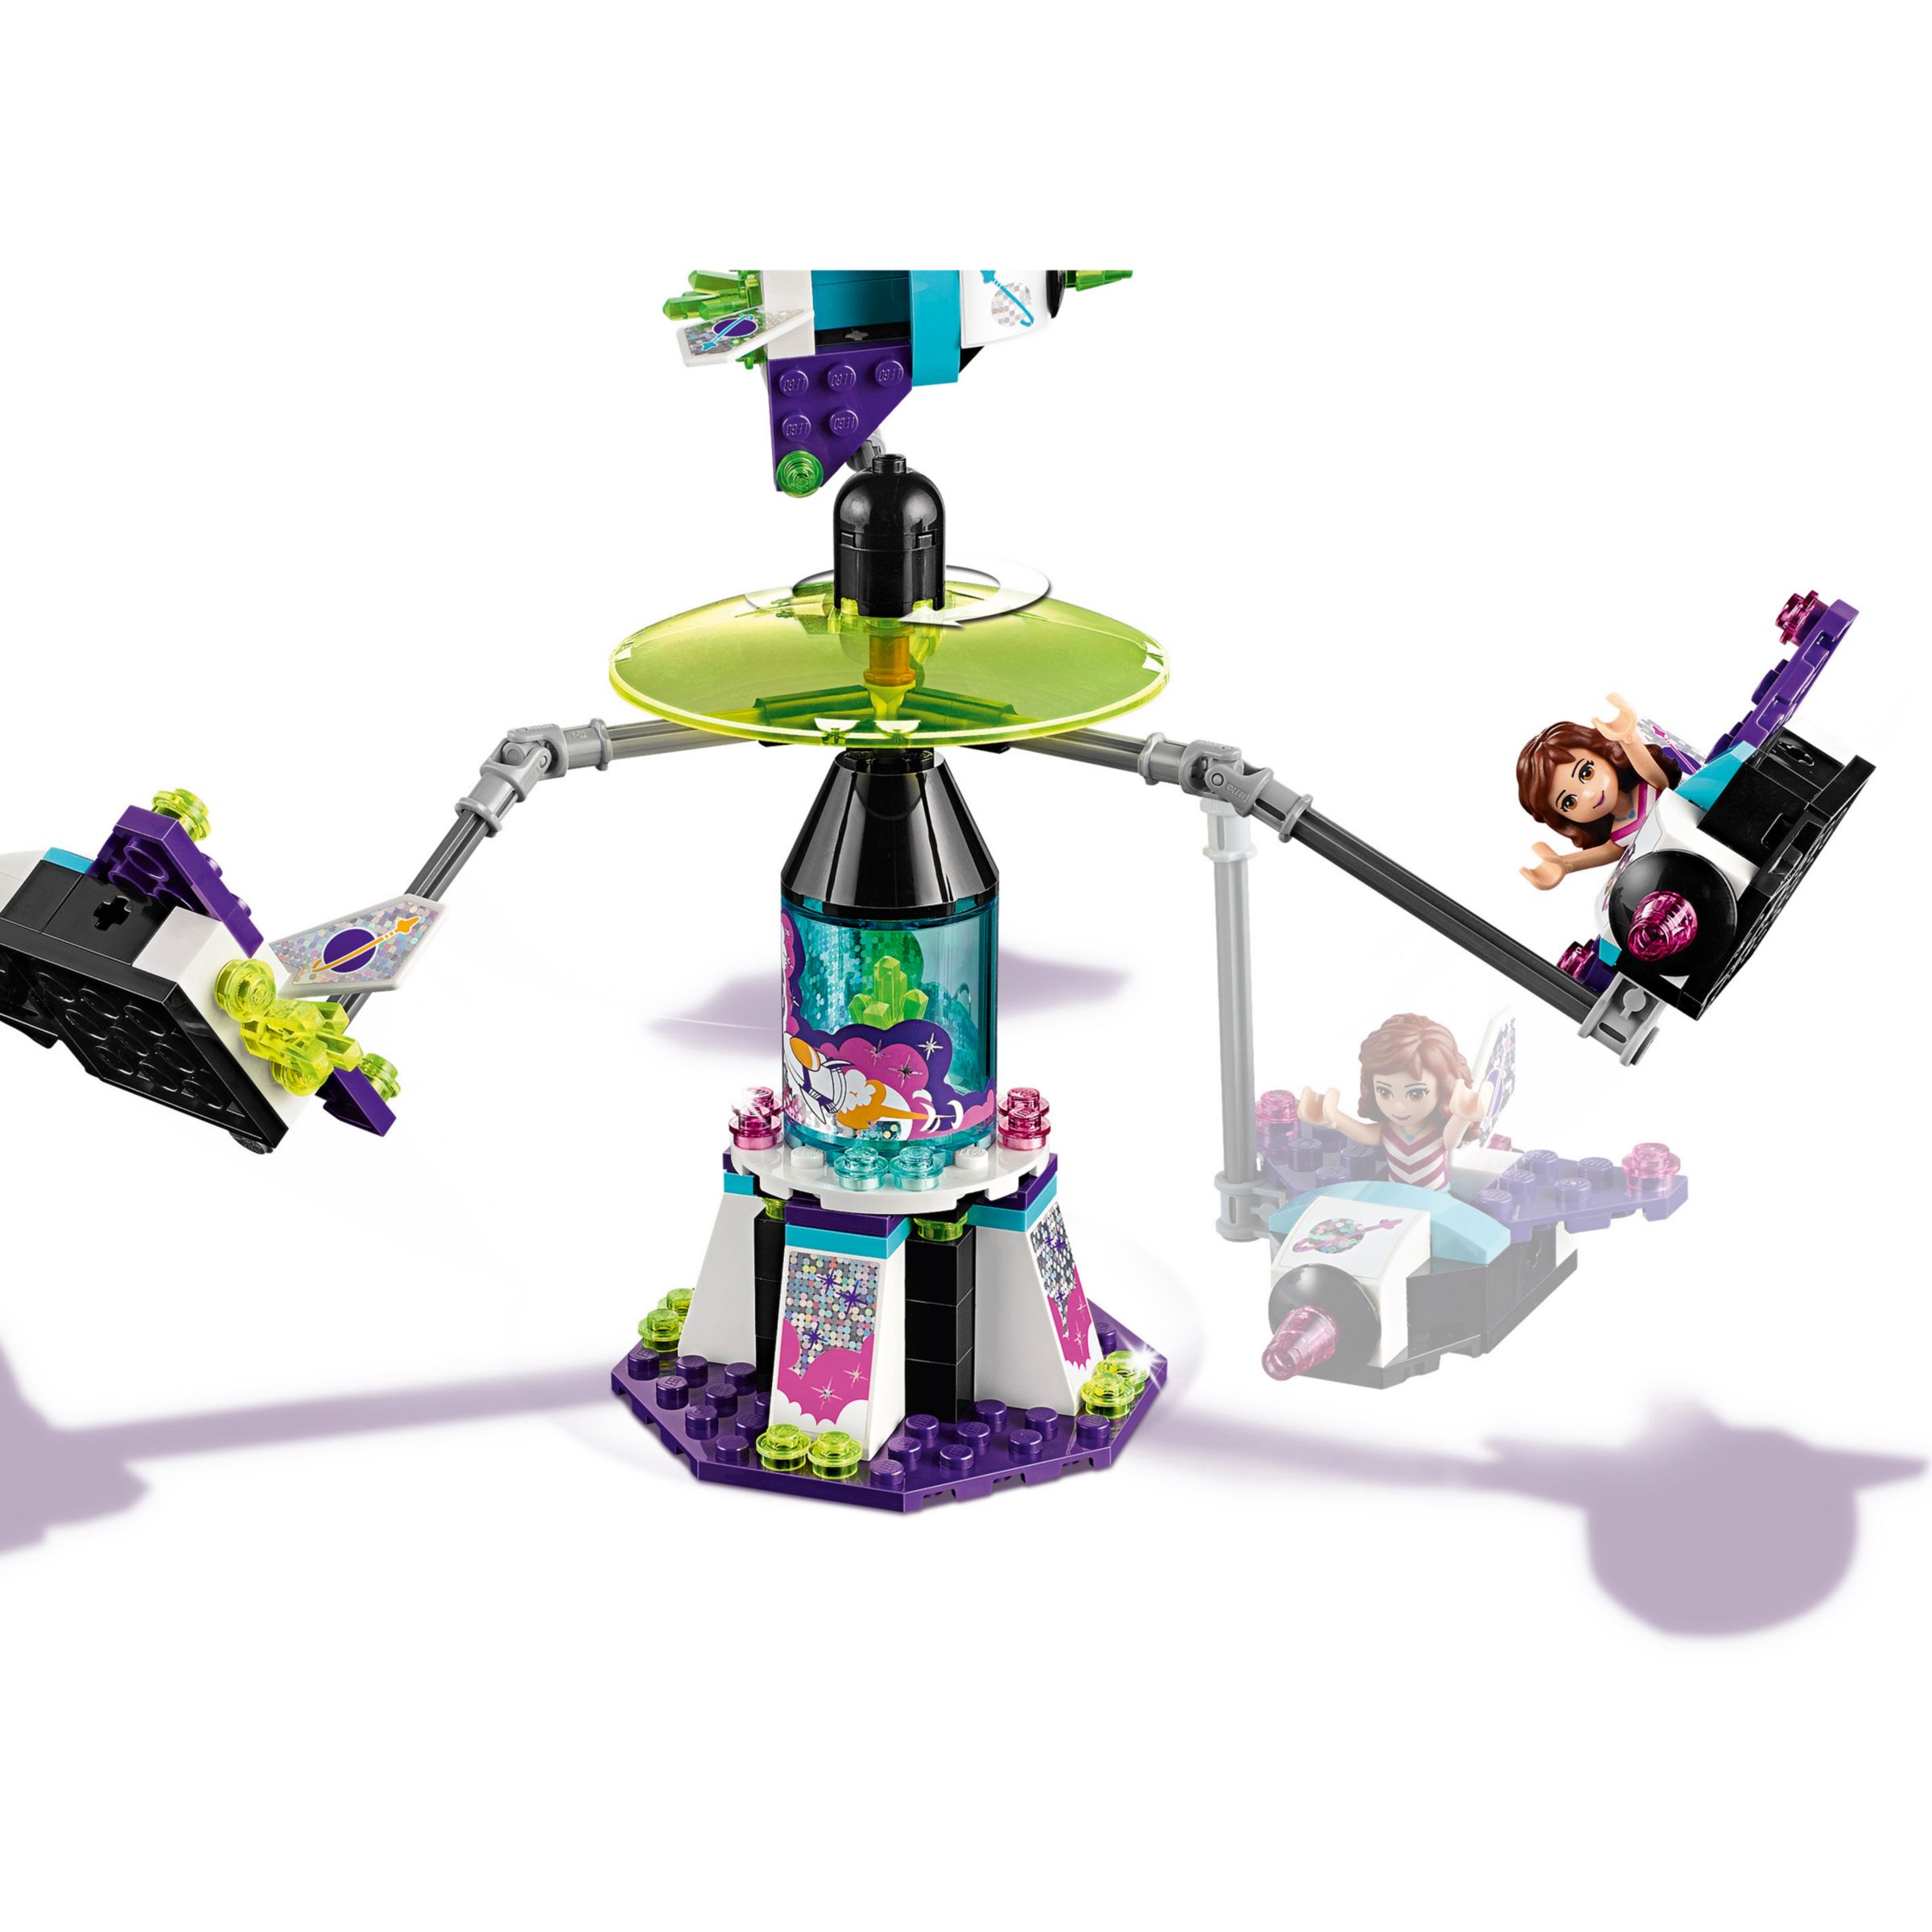 lego friends space